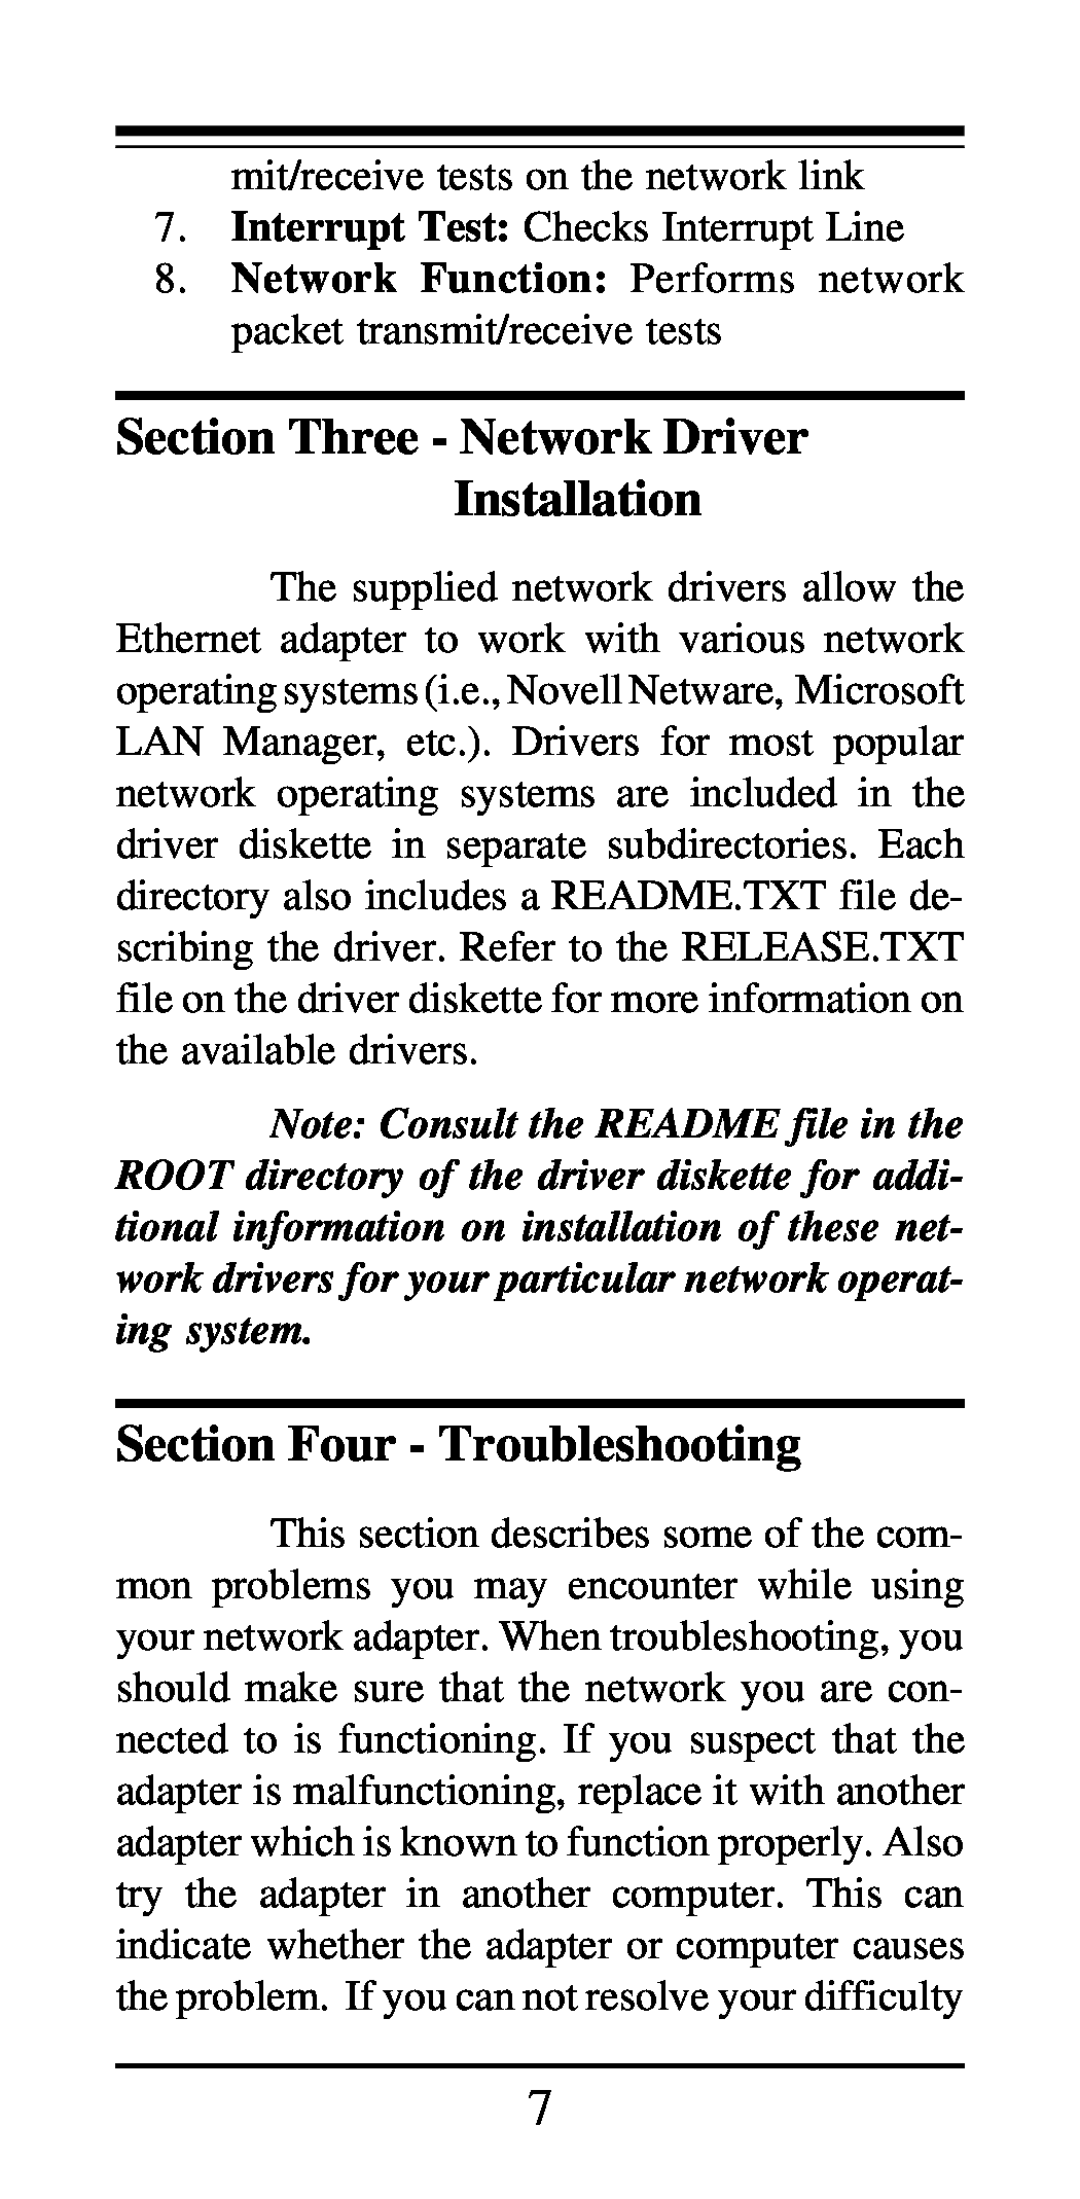 MaxTech PCN2000 Series manual Section Three - Network Driver Installation, Section Four - Troubleshooting 